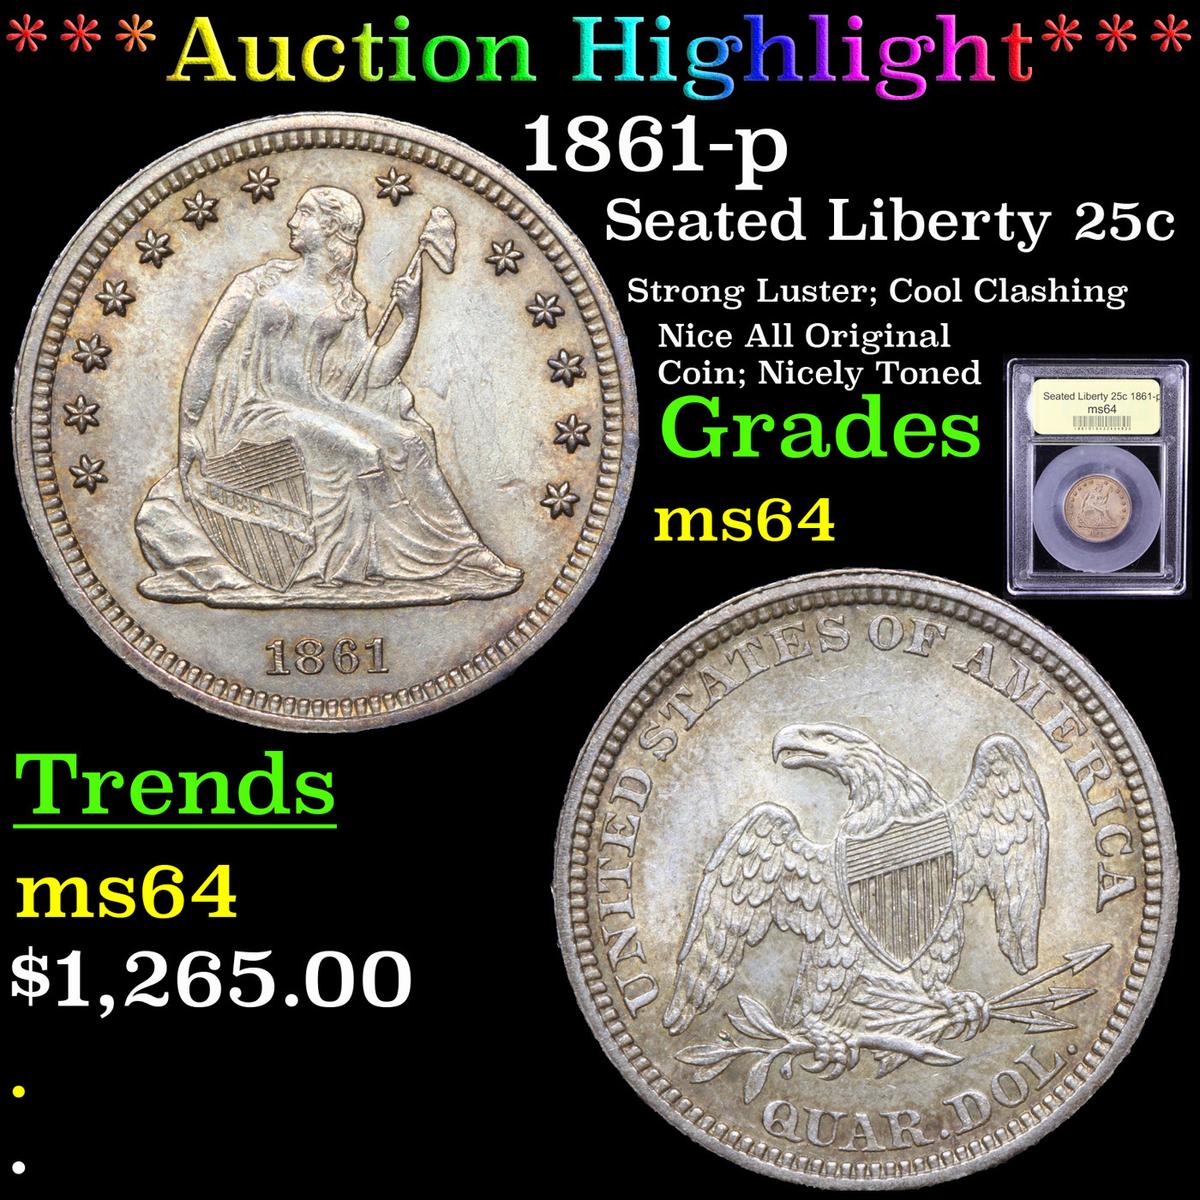 ***Auction Highlight*** 1861-p Seated Liberty Quarter 25c Graded Choice Unc By USCG (fc)